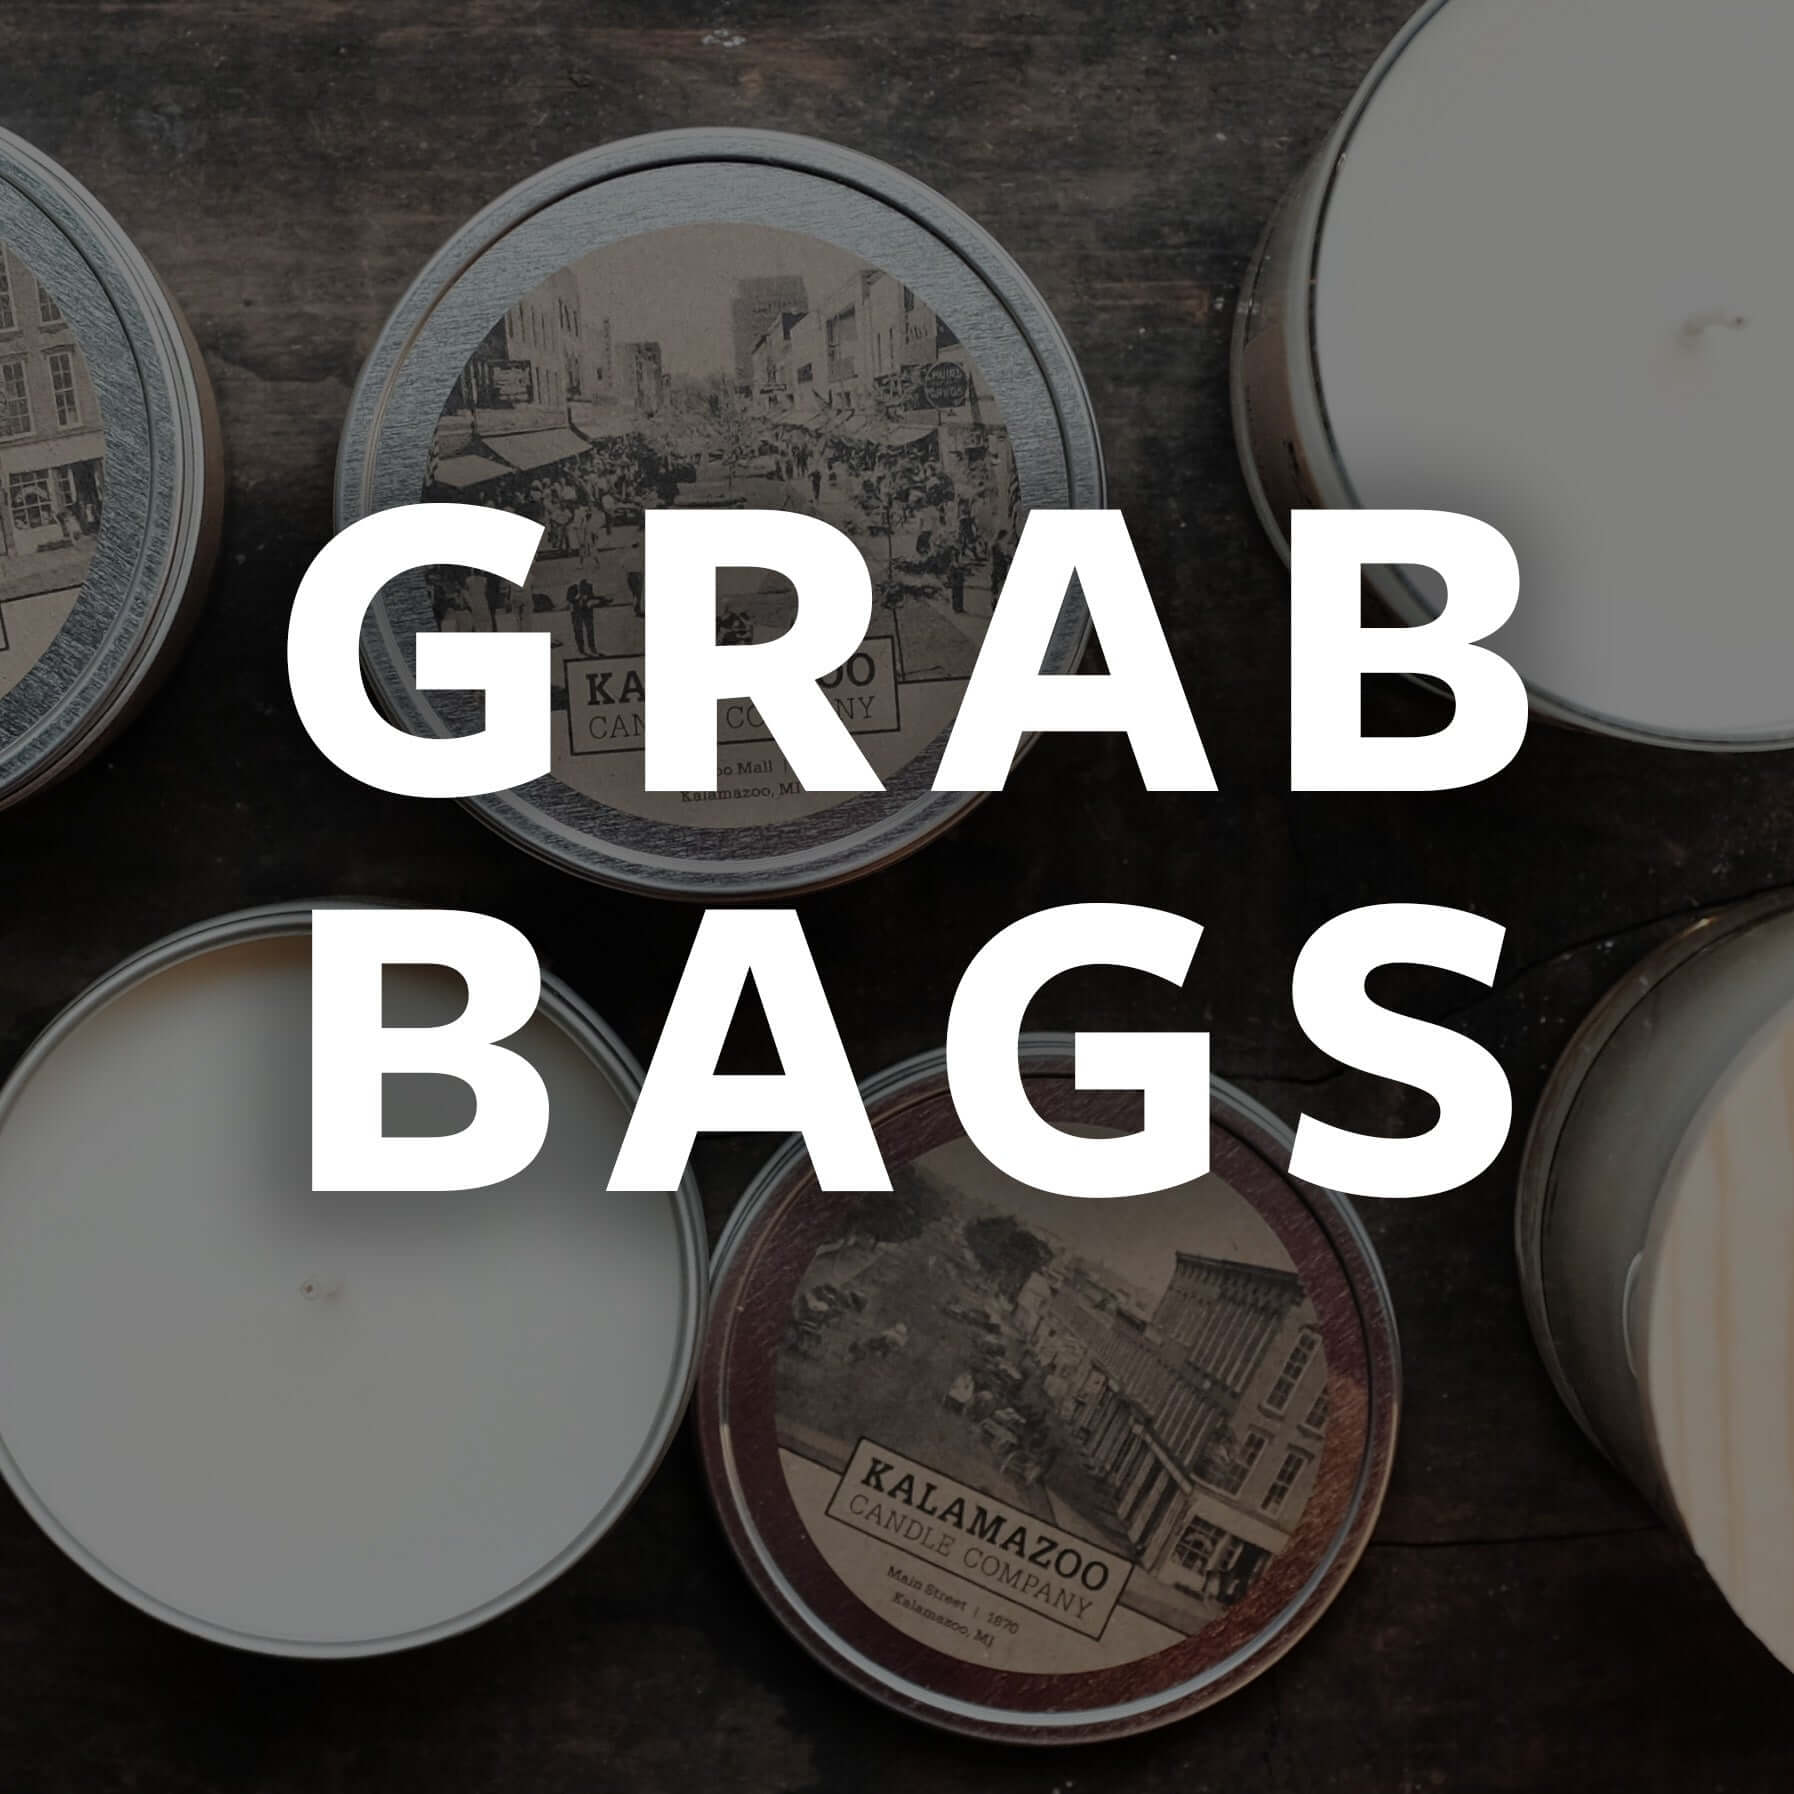 Grab Bag Bag a quality candle bargain during our Grab Bag sale! About $40 worth of candles for just $20! Your Grab Bag could contain a combination any of the following candles: votives, 5oz classic tins, 9oz classic jars, botanicals, and 15oz tins! Grab B